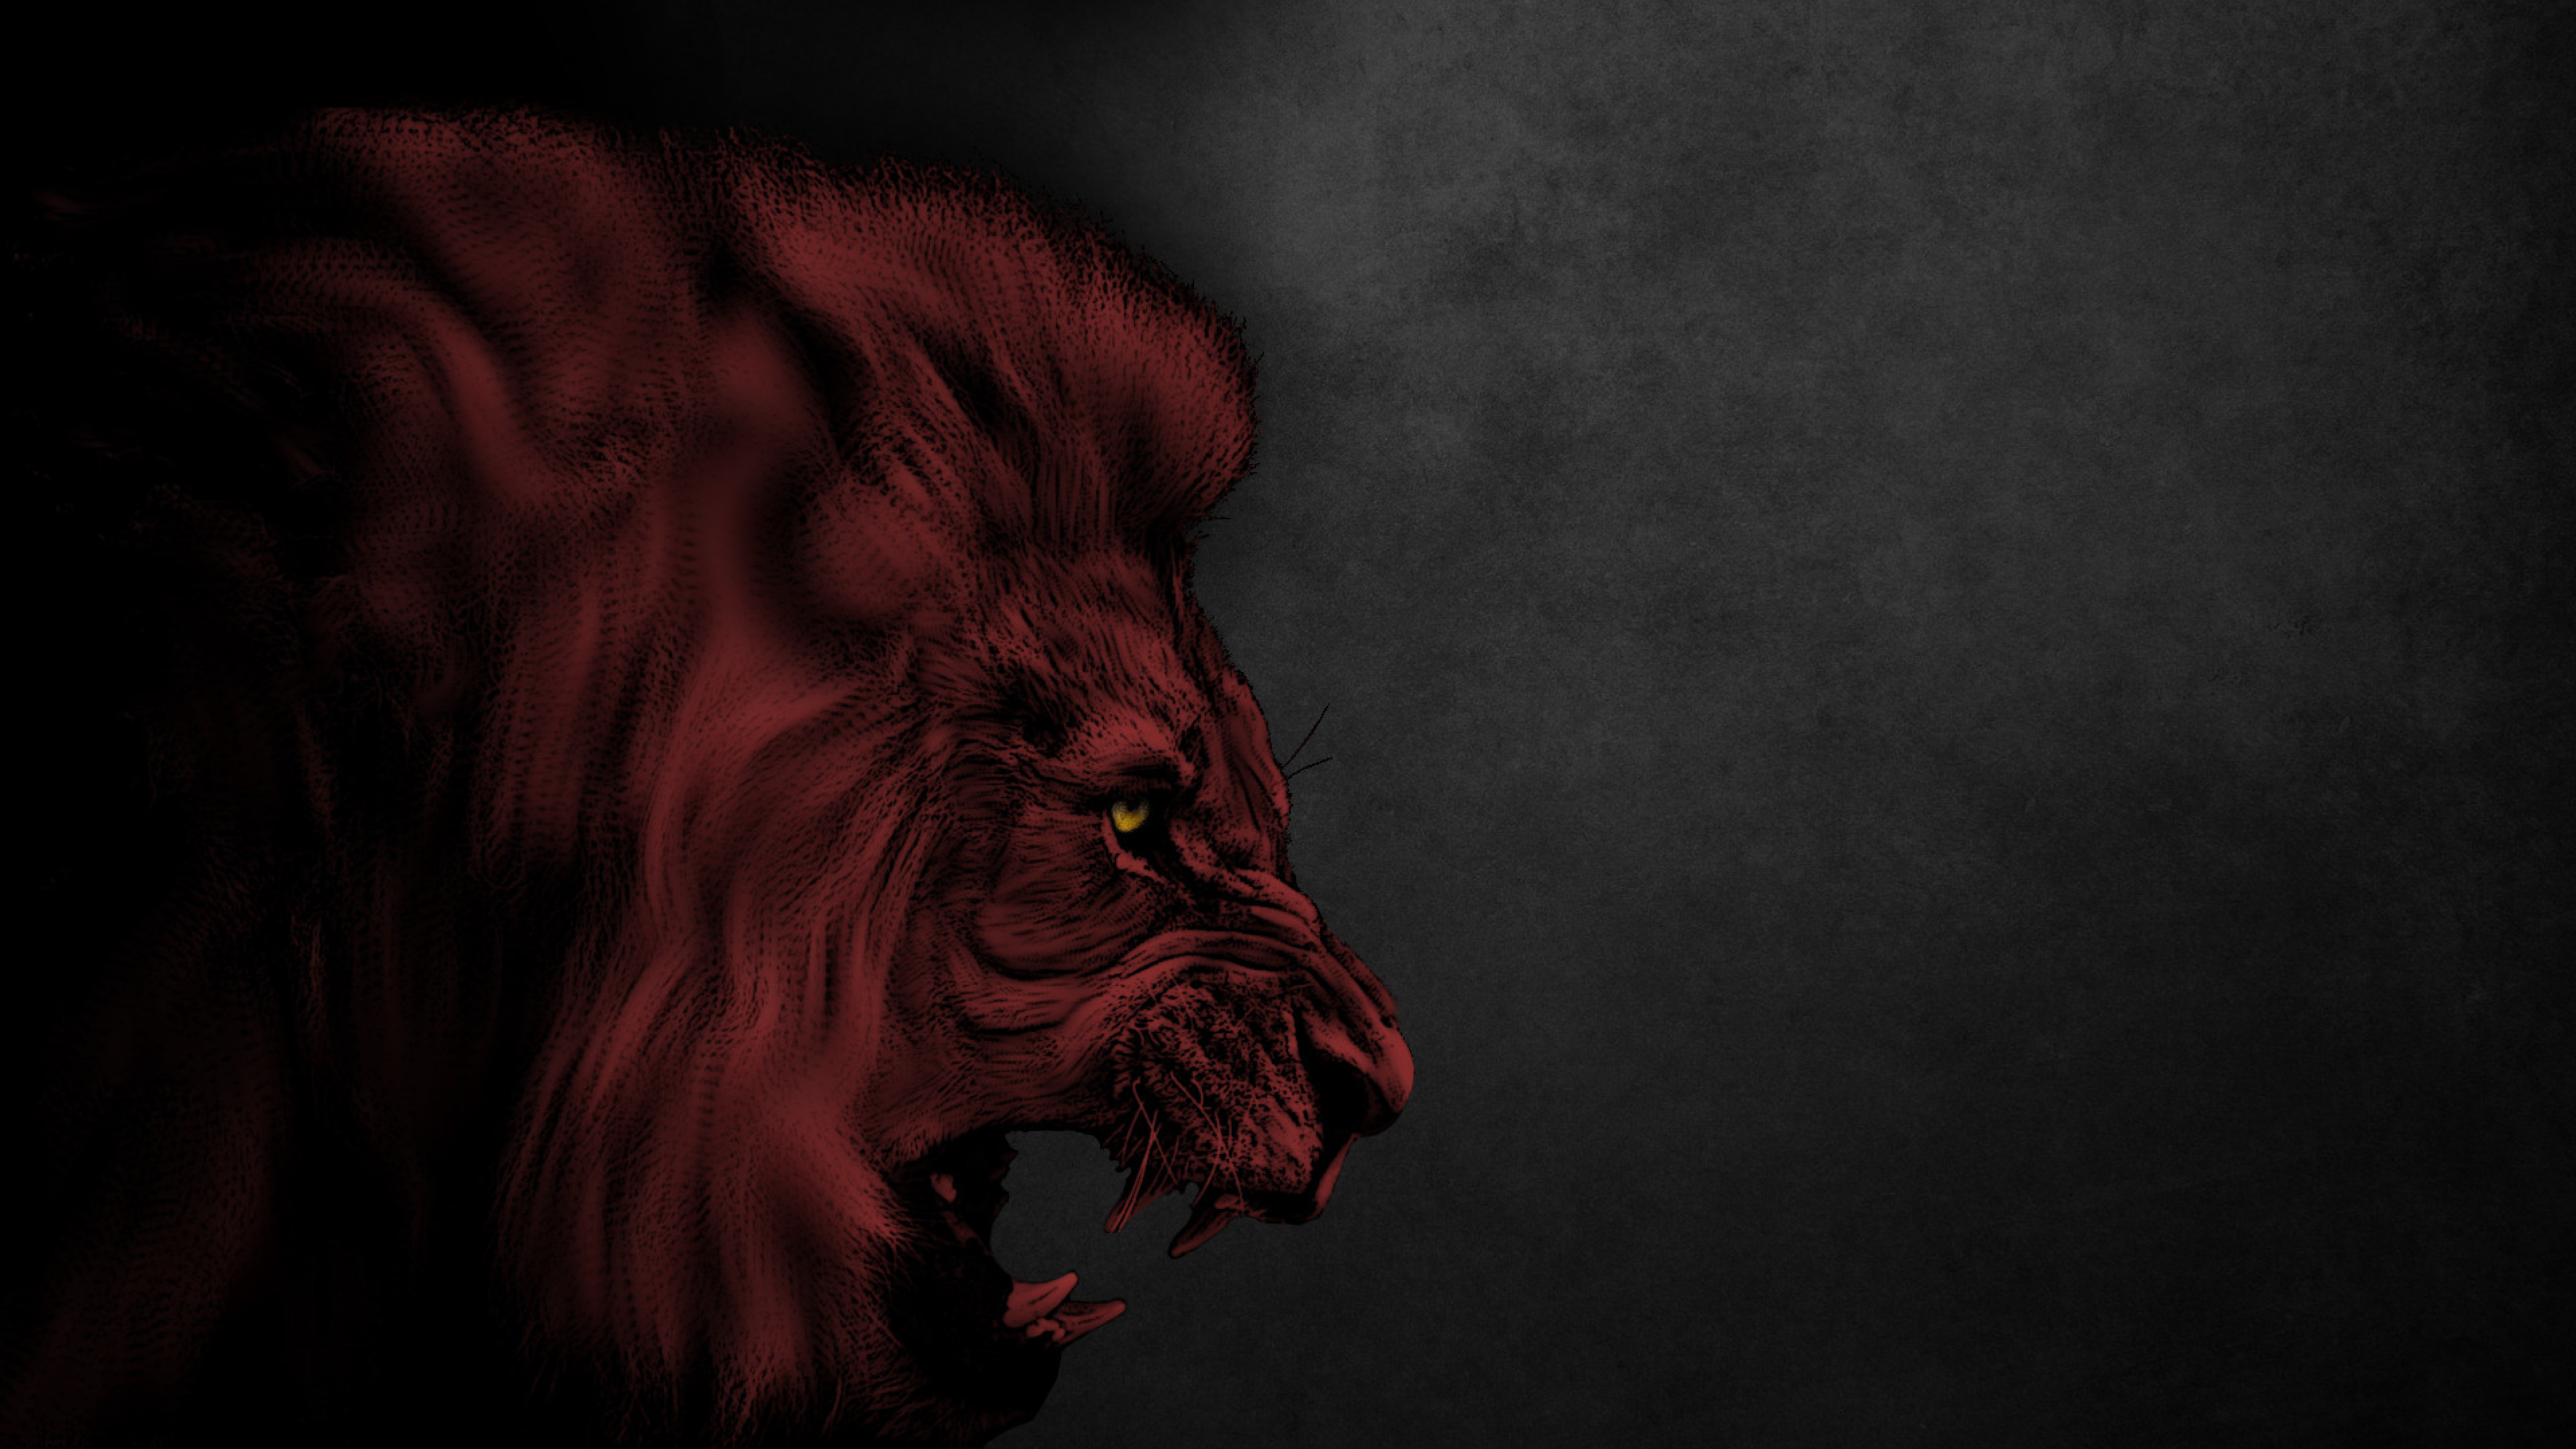 3840x2160 Red Lion Art 4k Wallpaper Hd Artist 4k Wallpapers Images Photos And Background Wallpapers Den